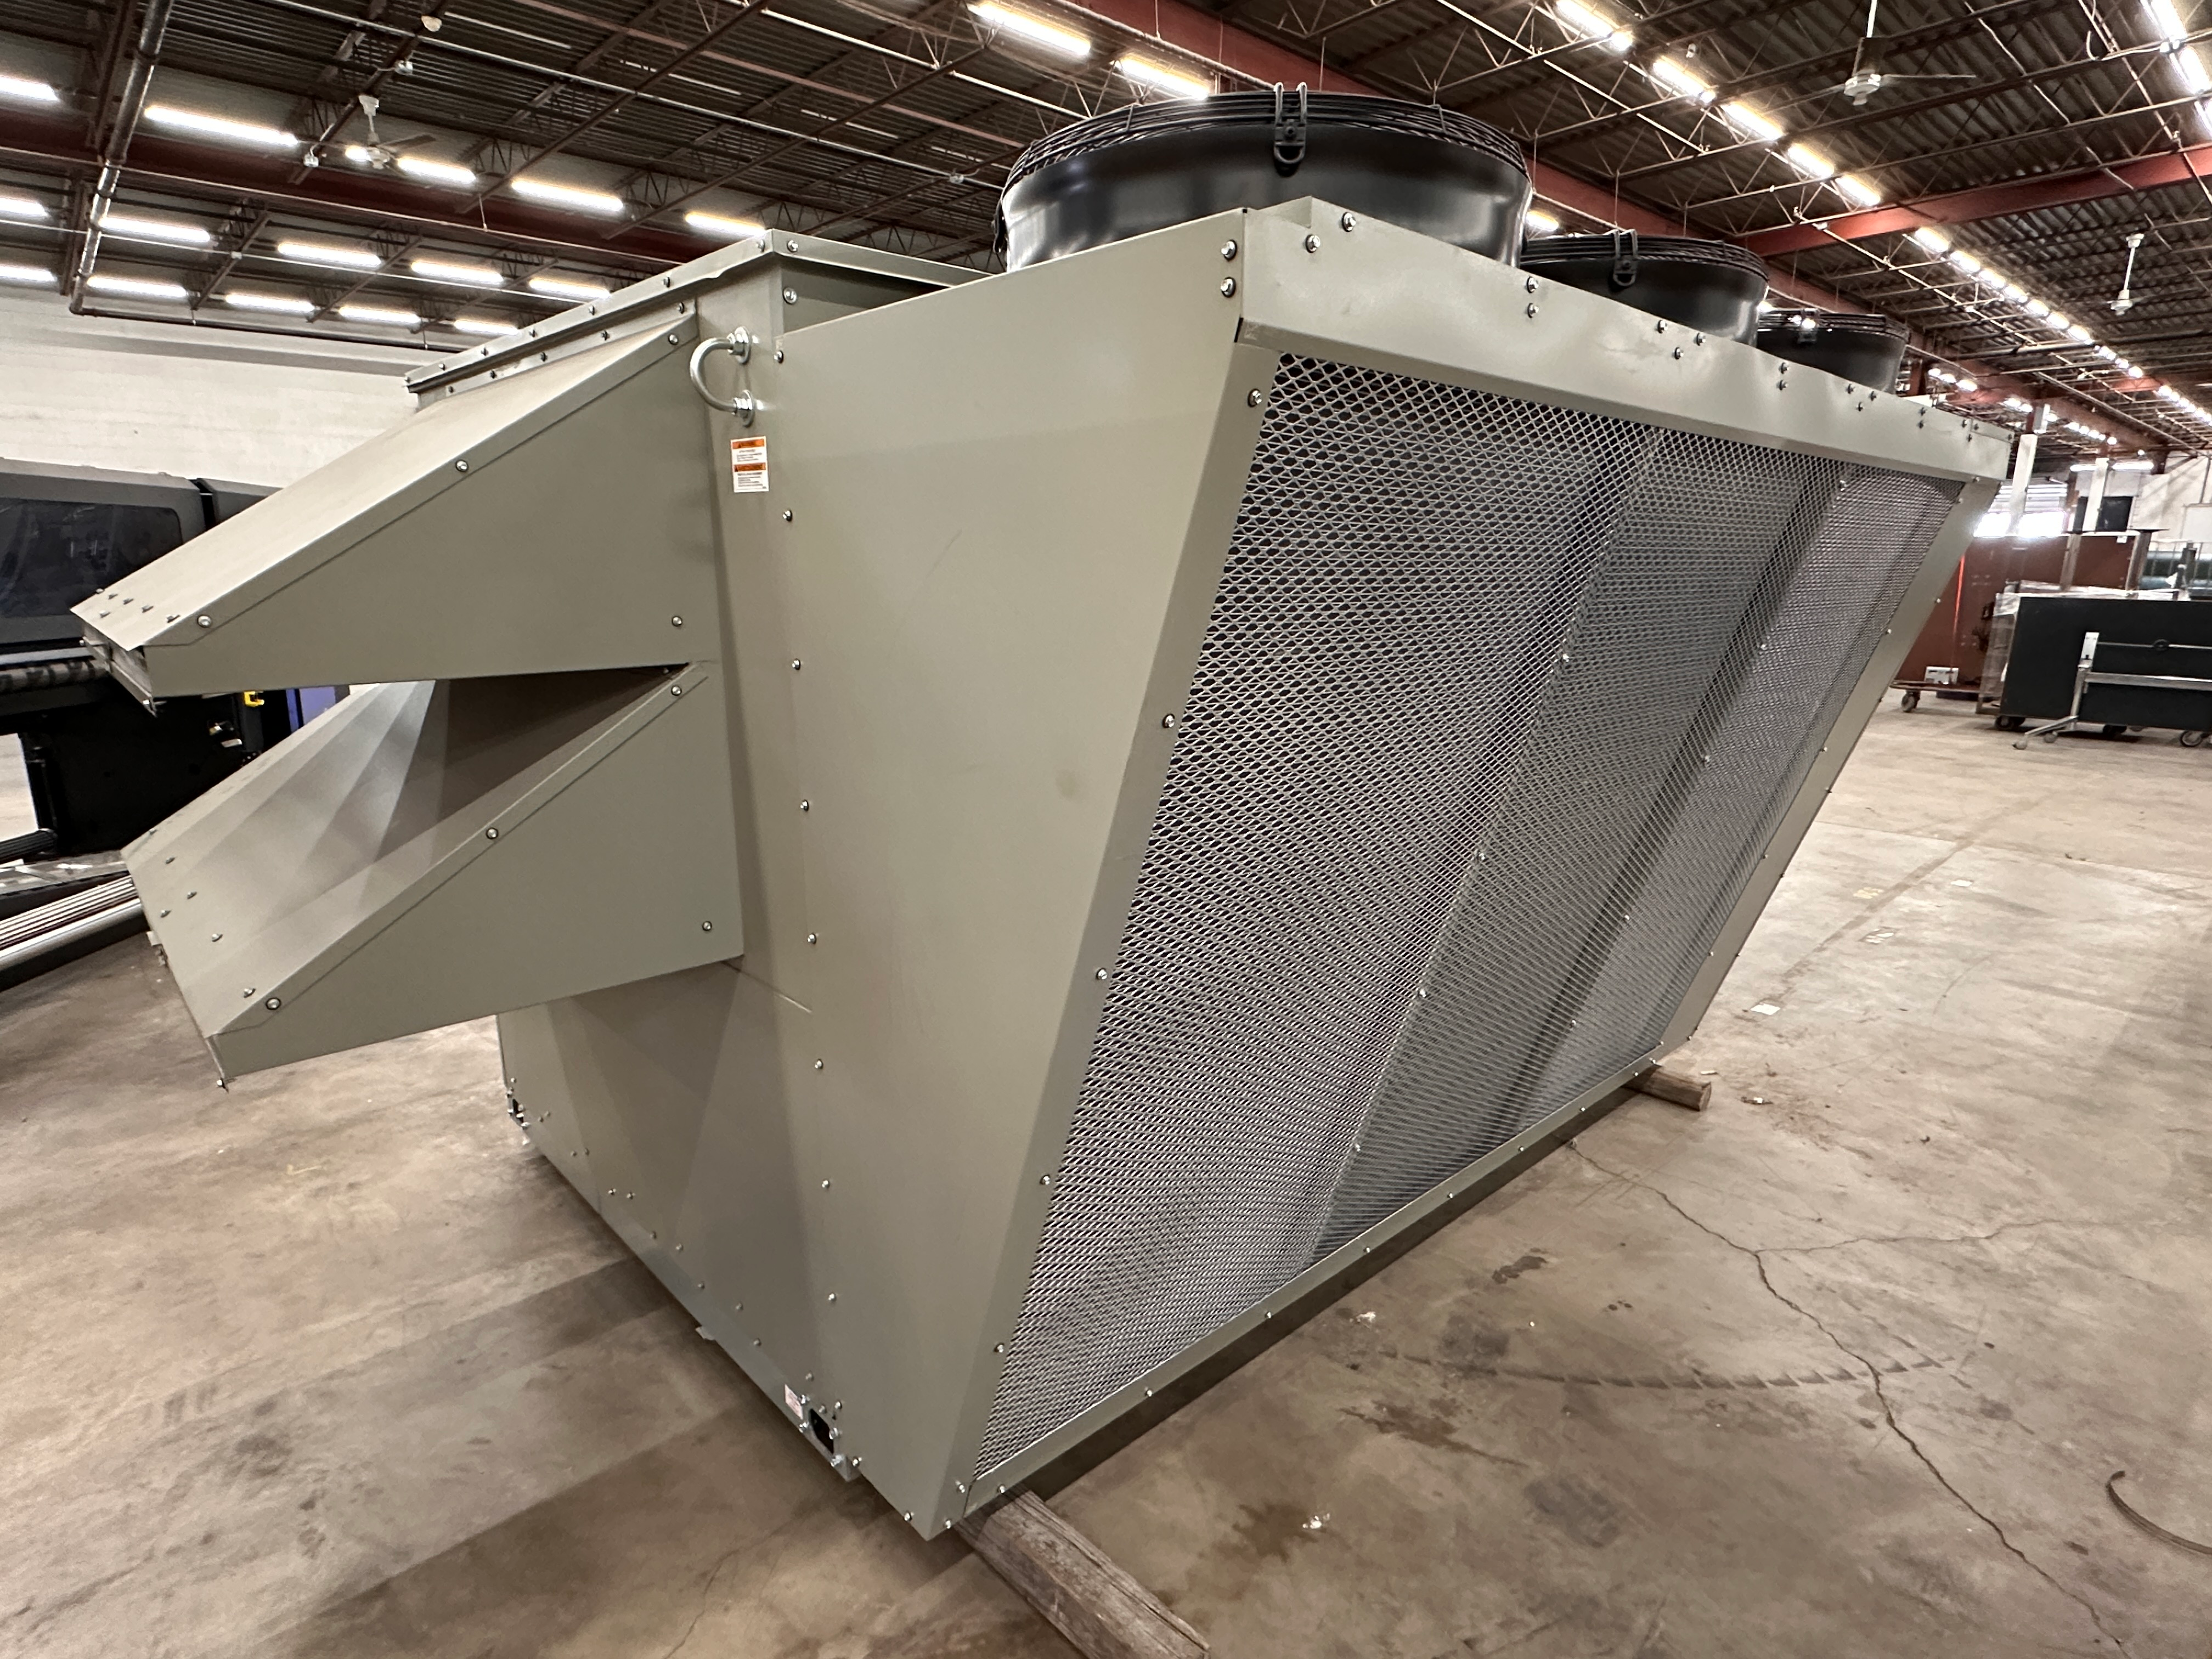 Greenheck Duct Furnace for Industrial Use Outdoor Installation